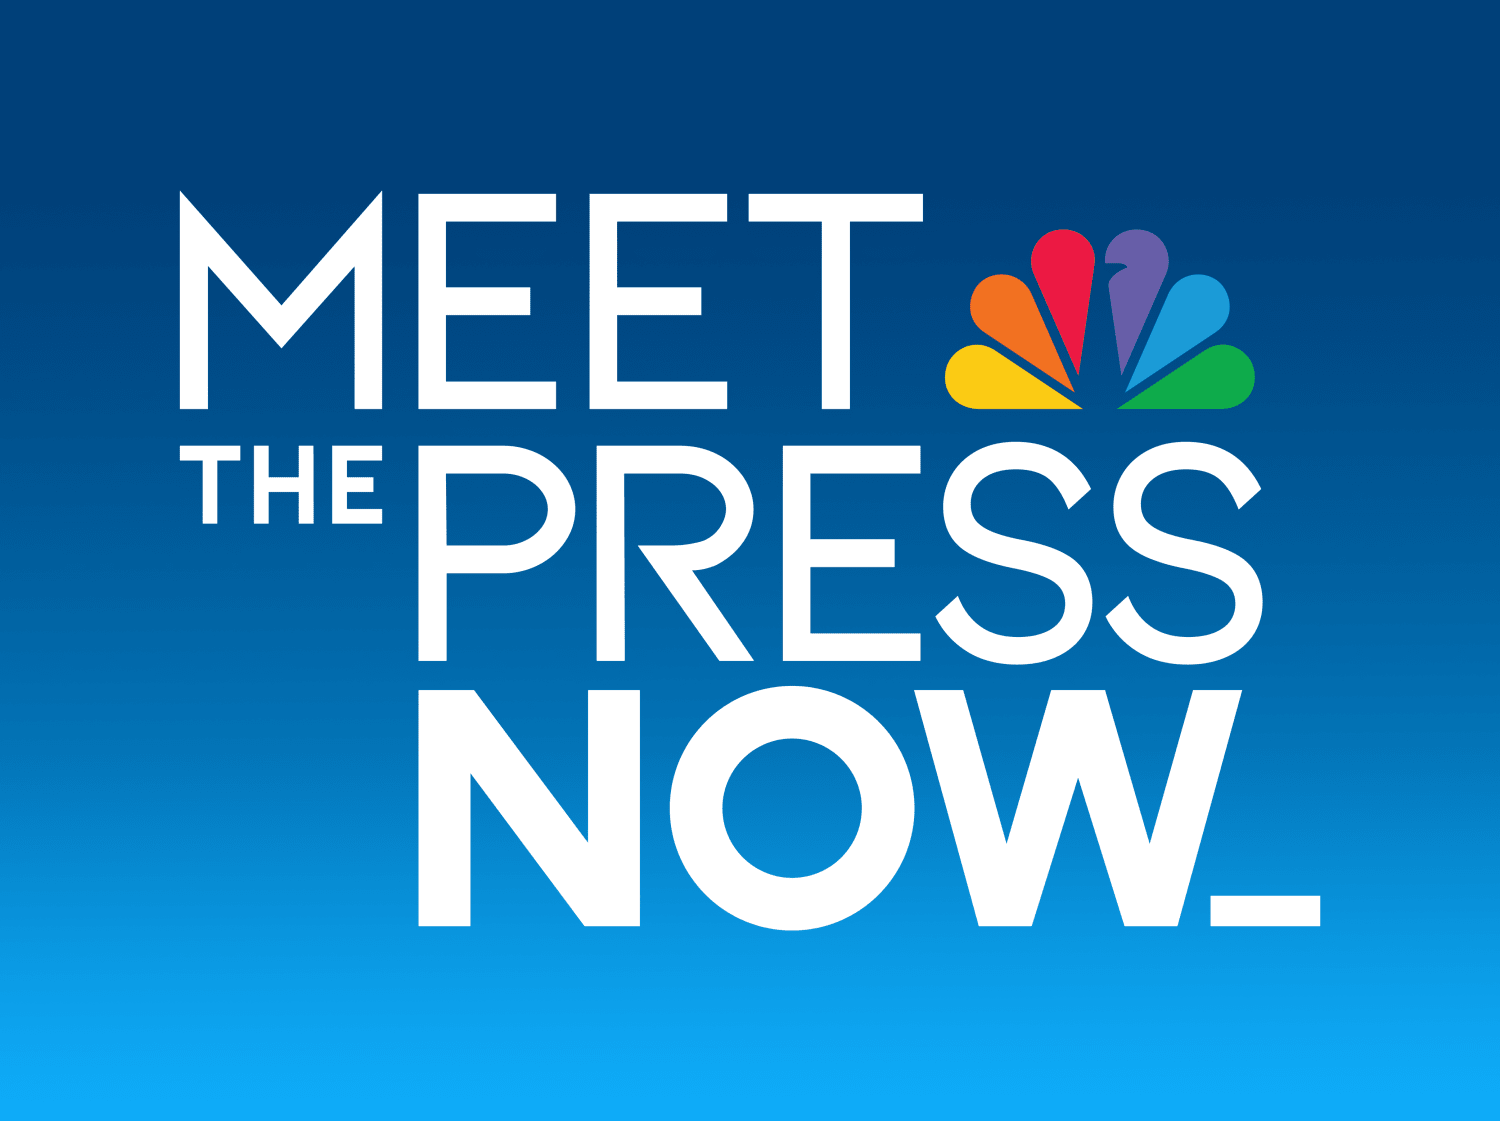 Meet the Press Inside Takes on the Latest Stories with Kristen Welker NBC News